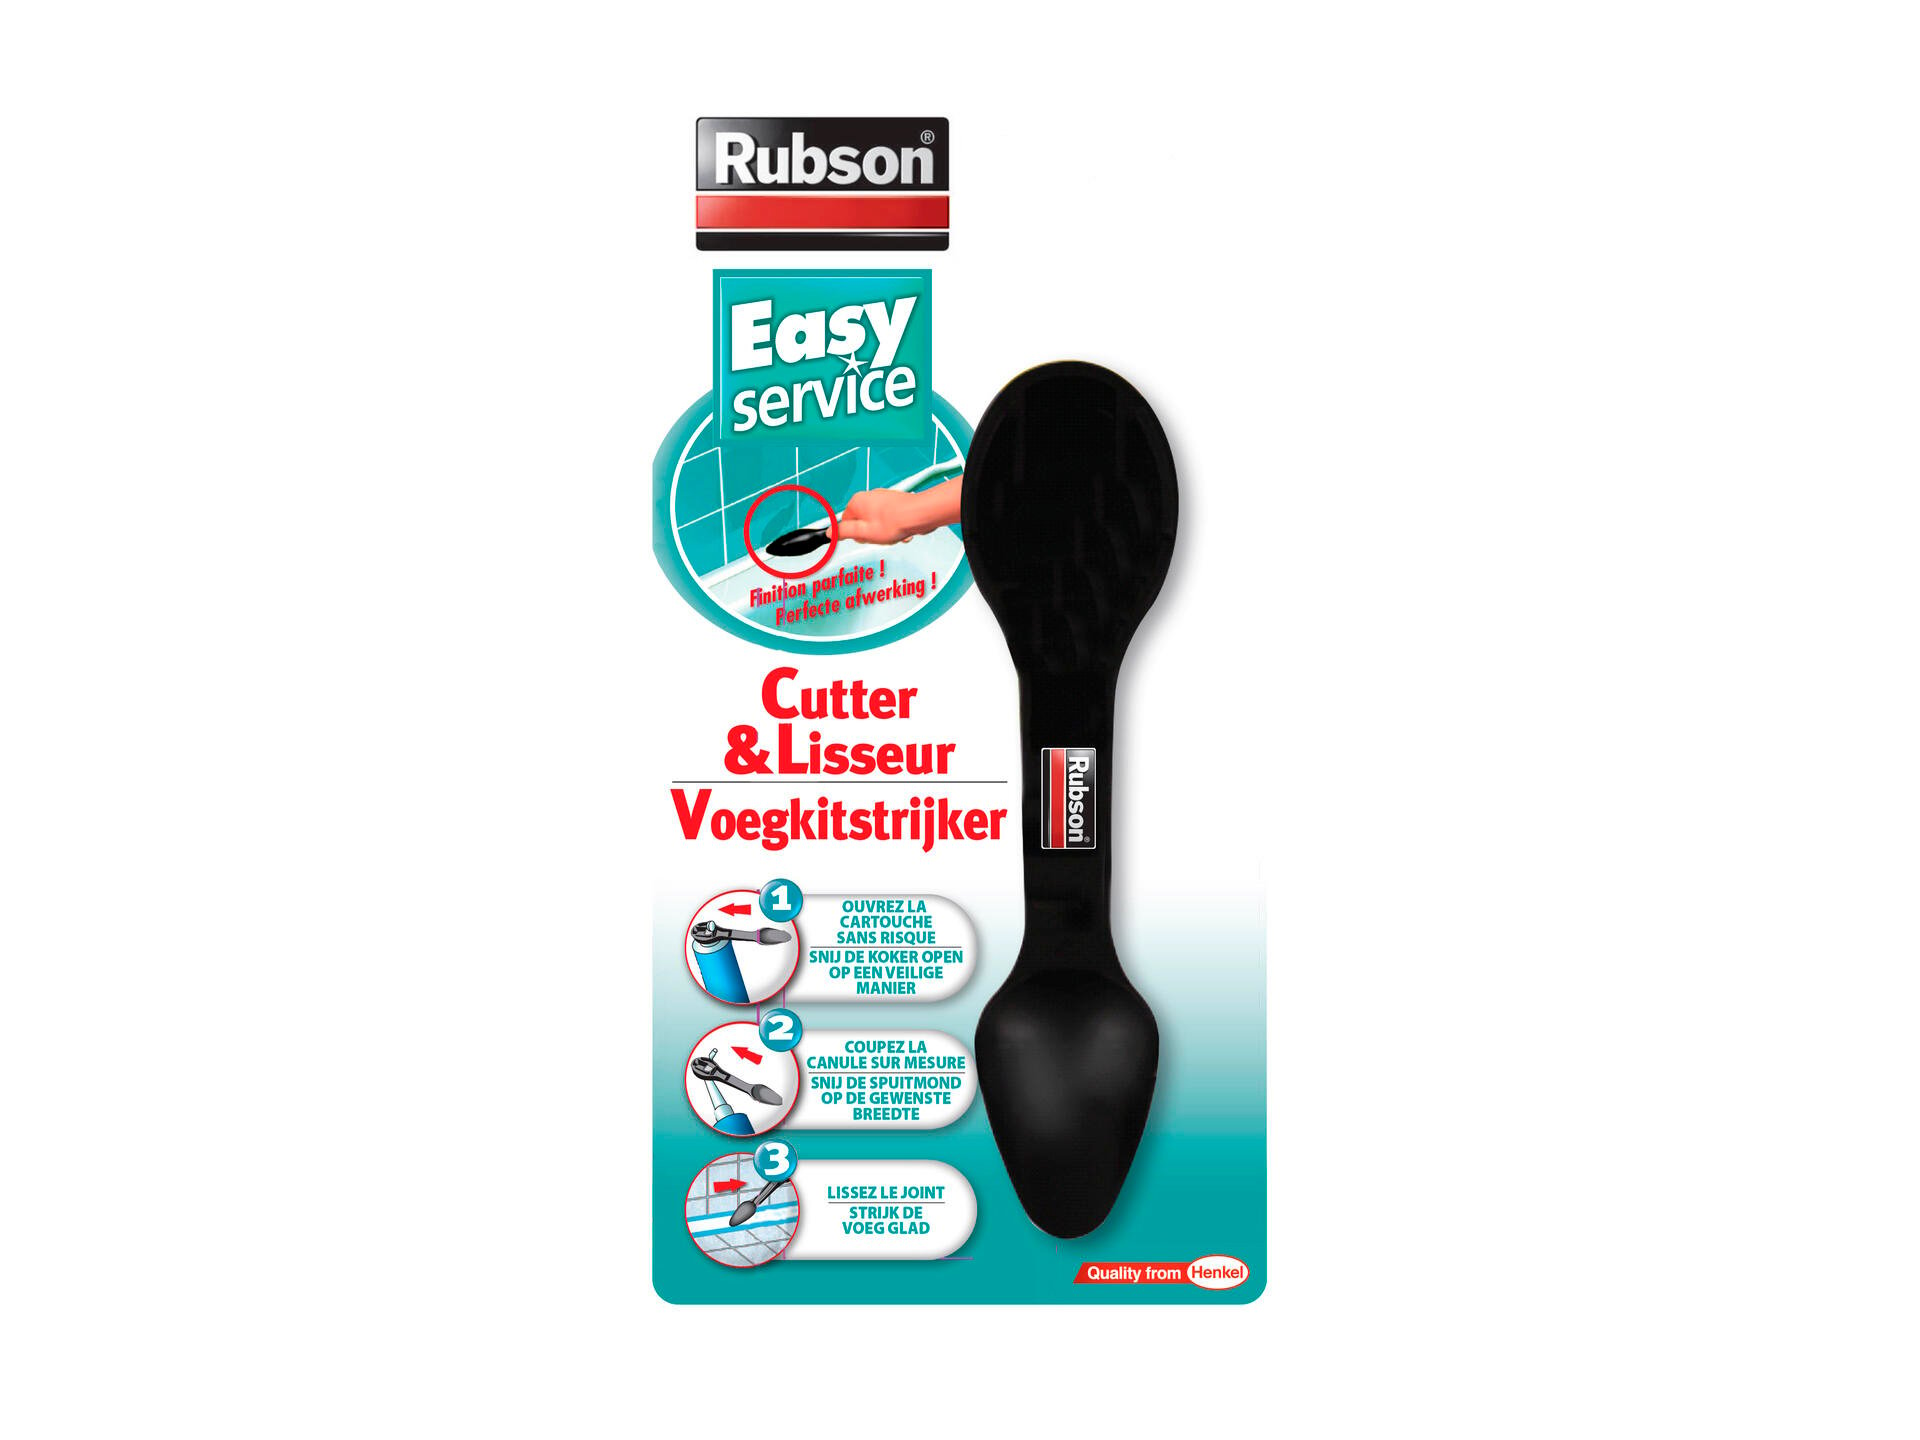 Rubson enlève joints silicone